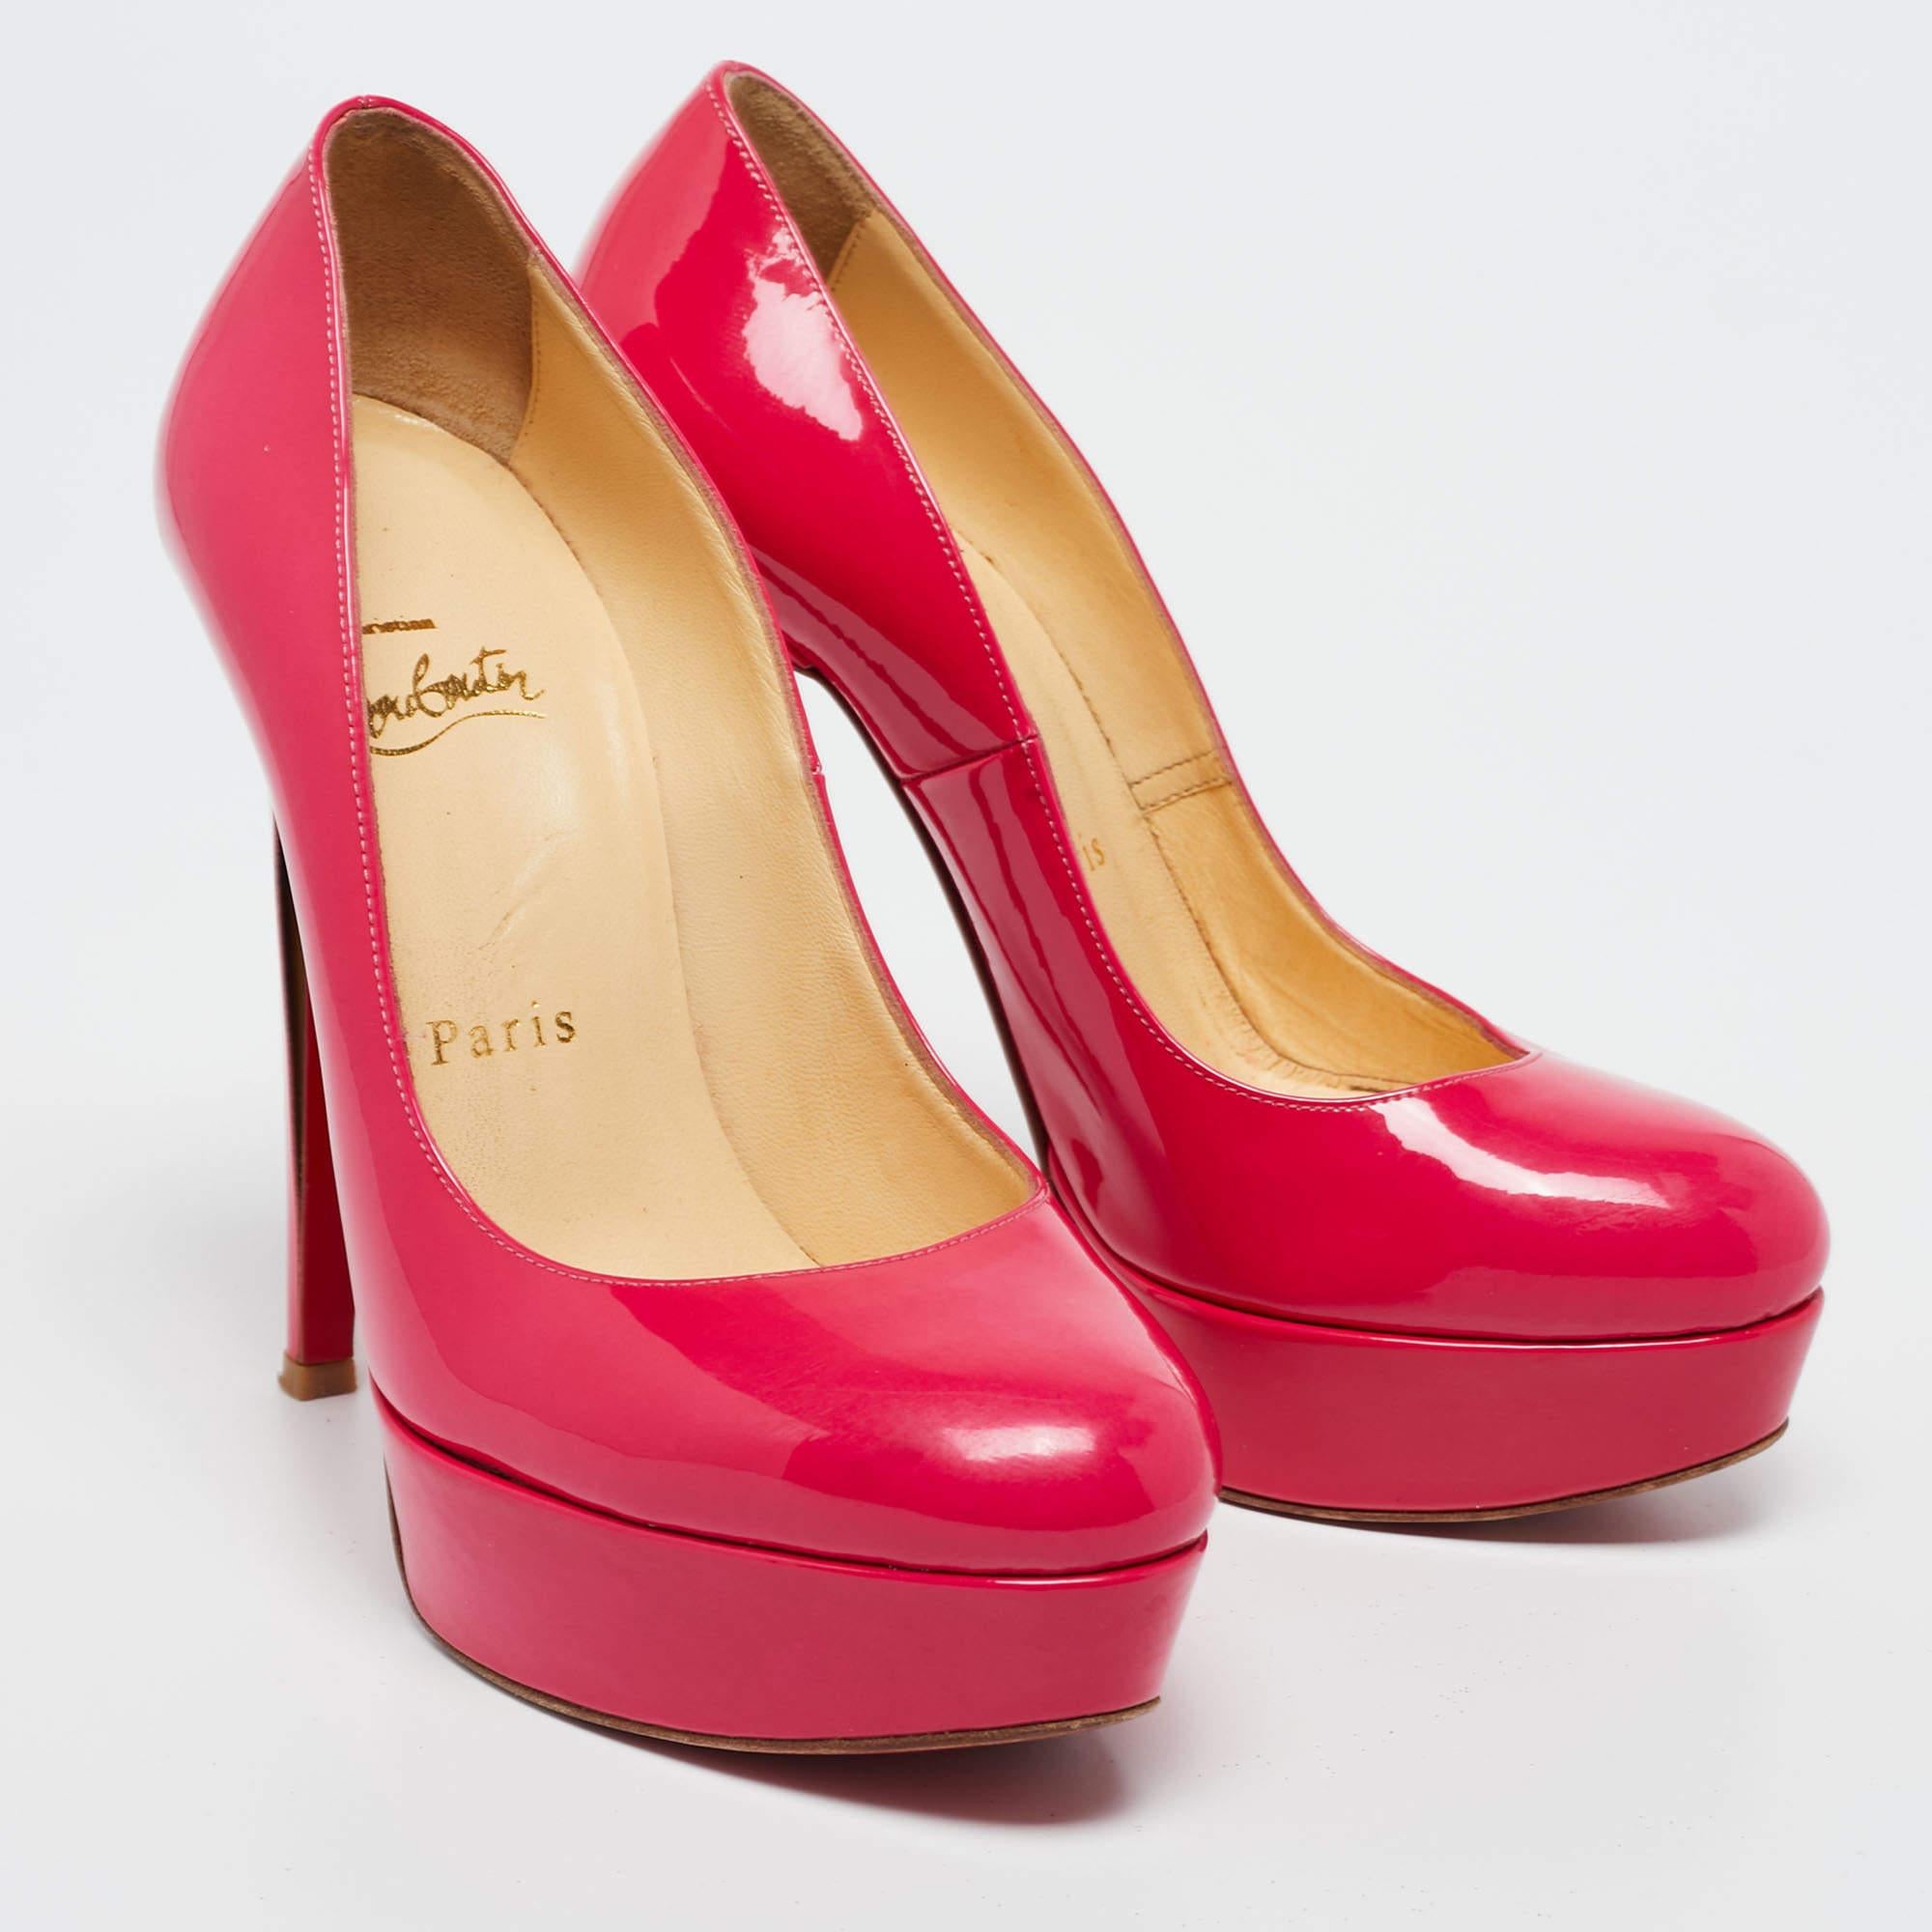 Christian Louboutin Neon Pink Patent Leather Bianca Pumps Size 36 For Sale 3